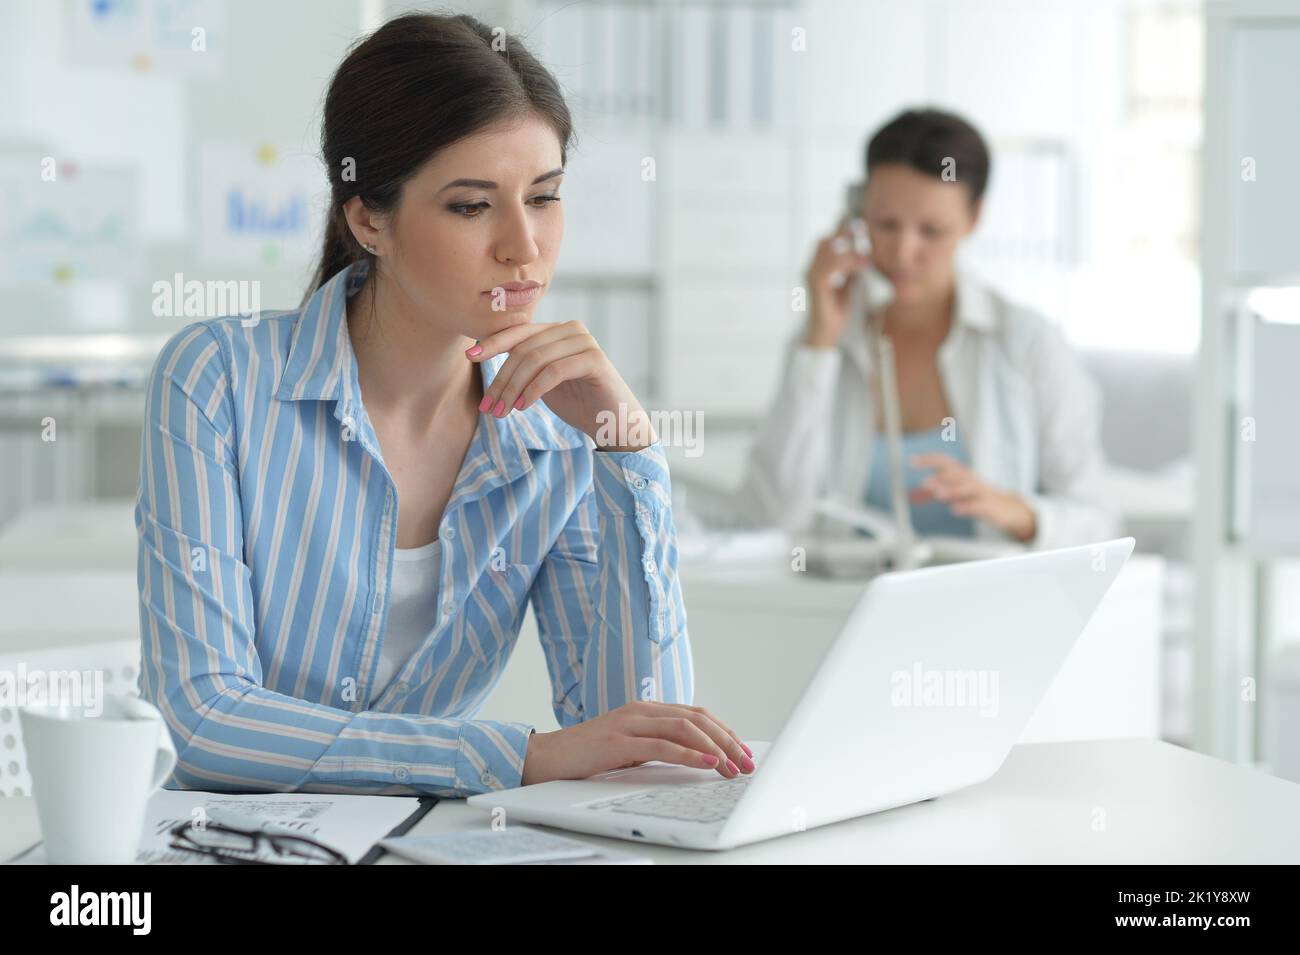 Portrait of a smiling beautiful business woman using a laptop. Stock Photo